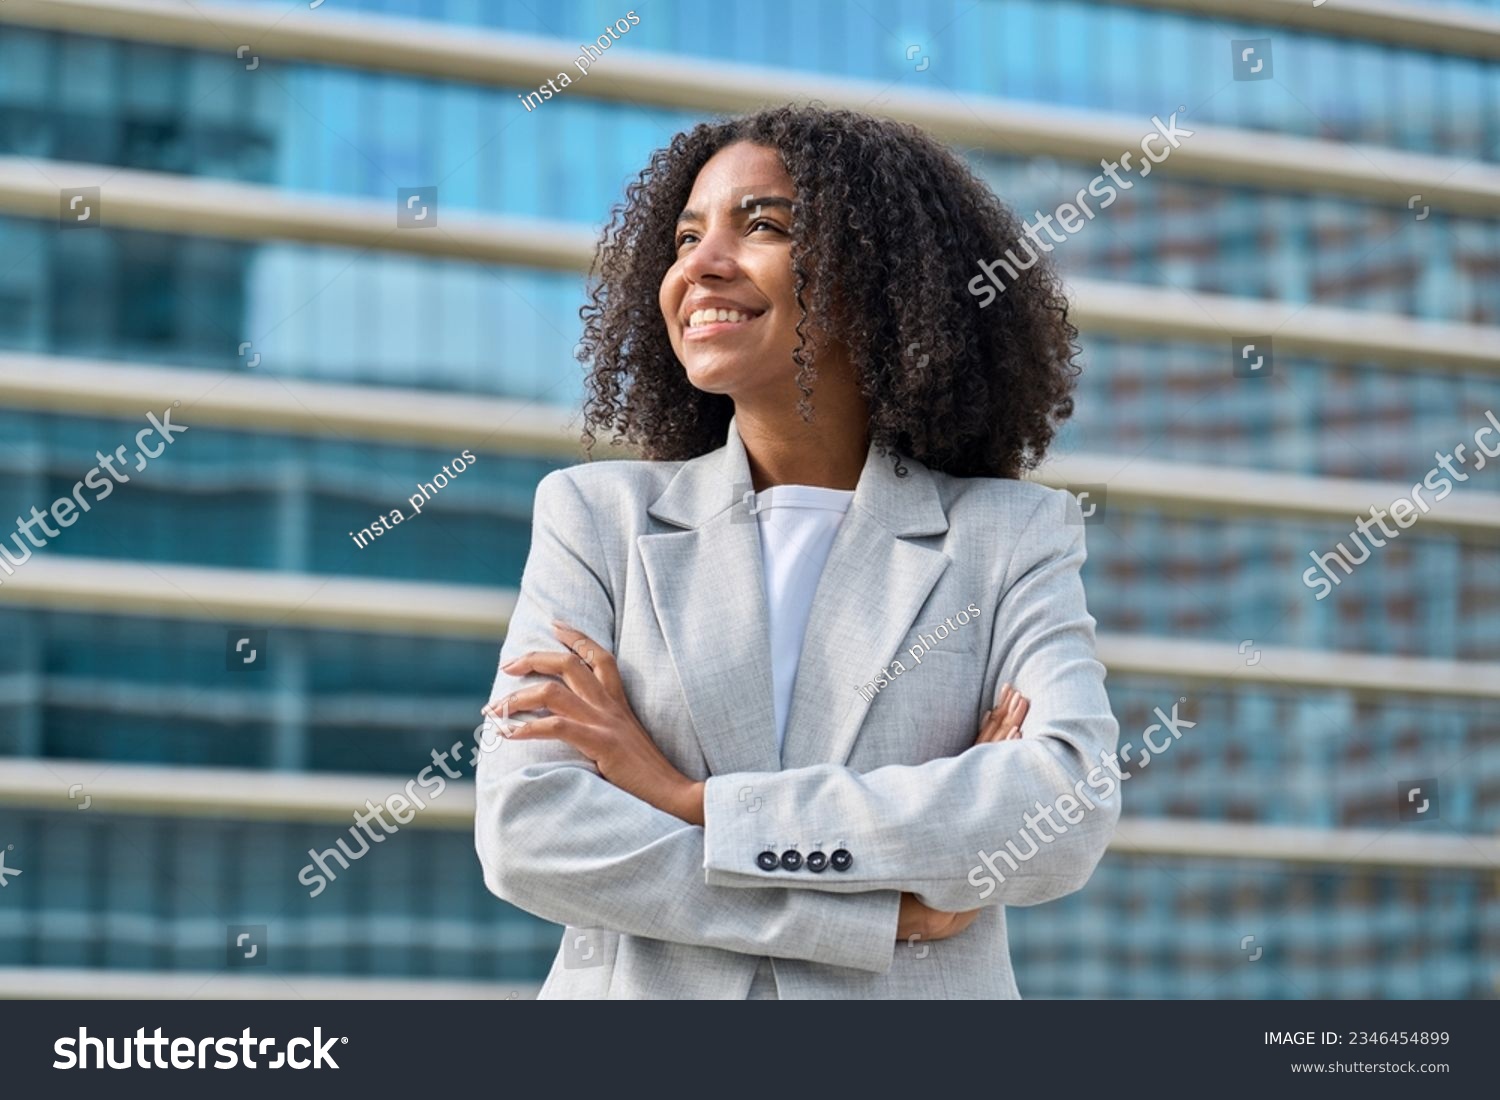 Happy young African American business woman standing in city looking away. Confident smiling confident professional businesswoman leader wearing suit thinking of success, dreaming of new goal outdoor. #2346454899